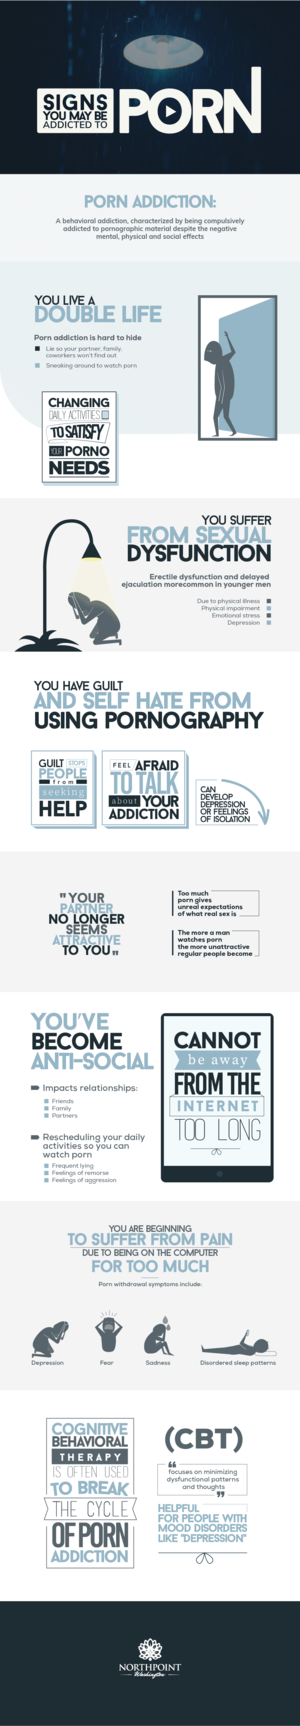 behavior - 11 Signs You May Be Addicted to Porn | Northpoint Washington